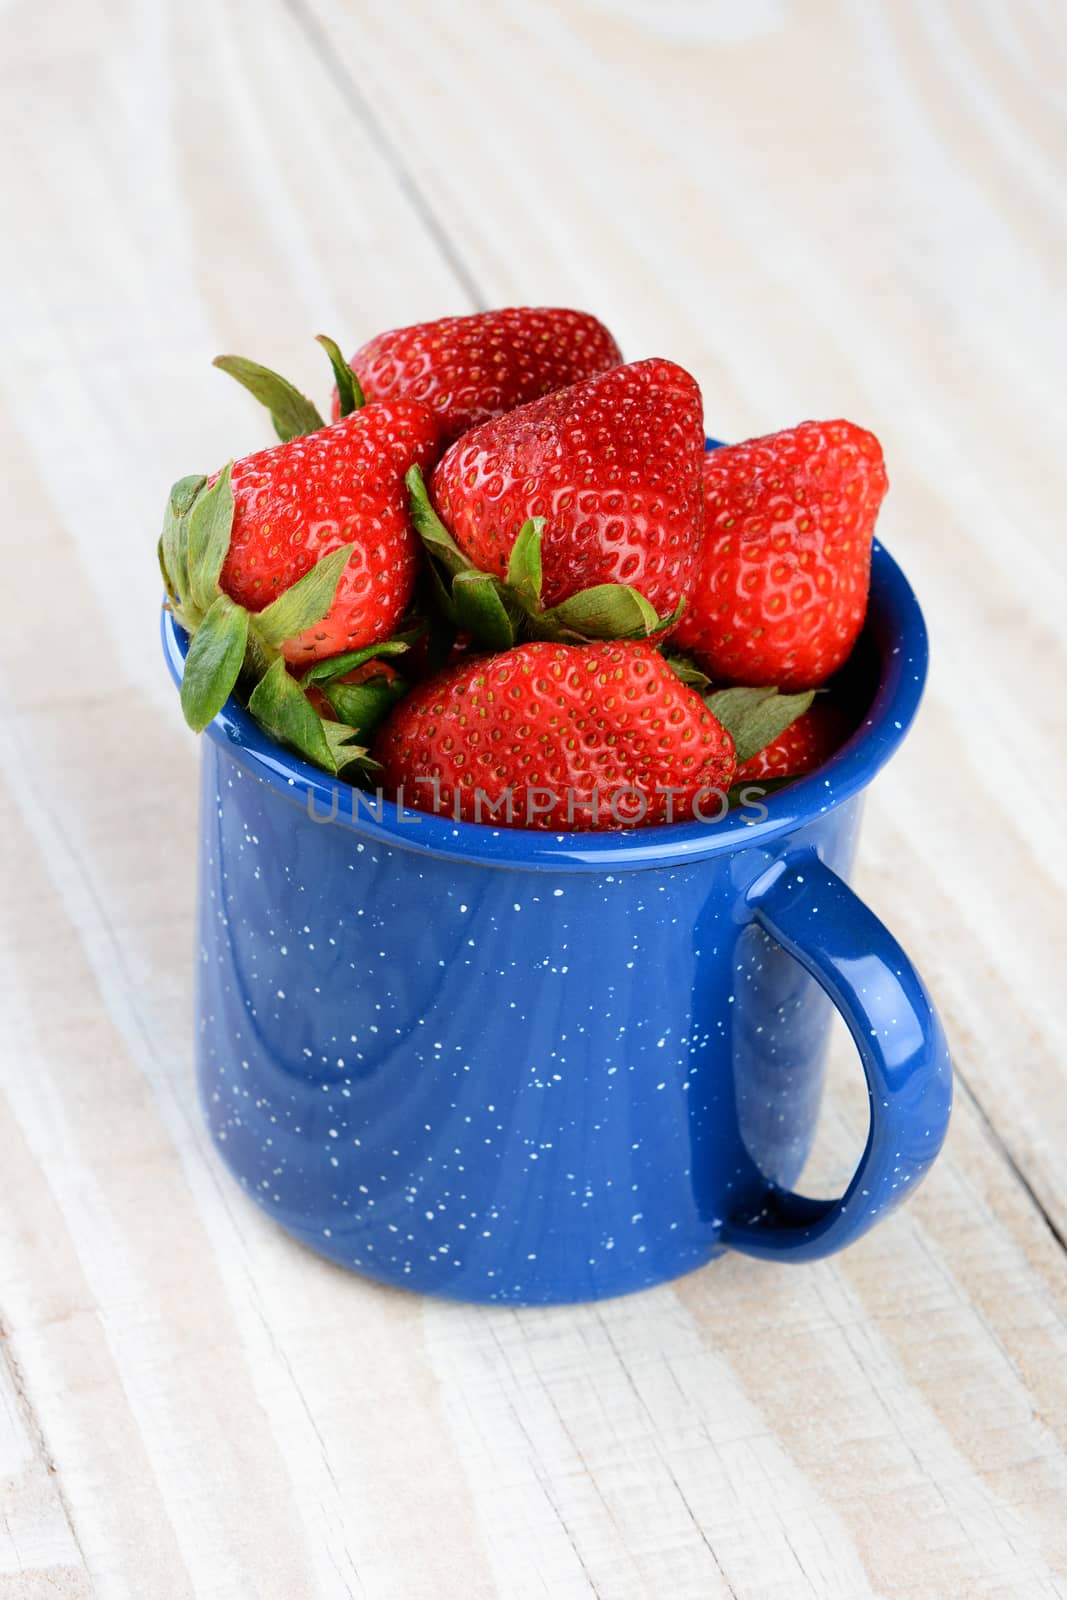 Blue Cup Full of Fresh Picked Ripe Strawberries by sCukrov